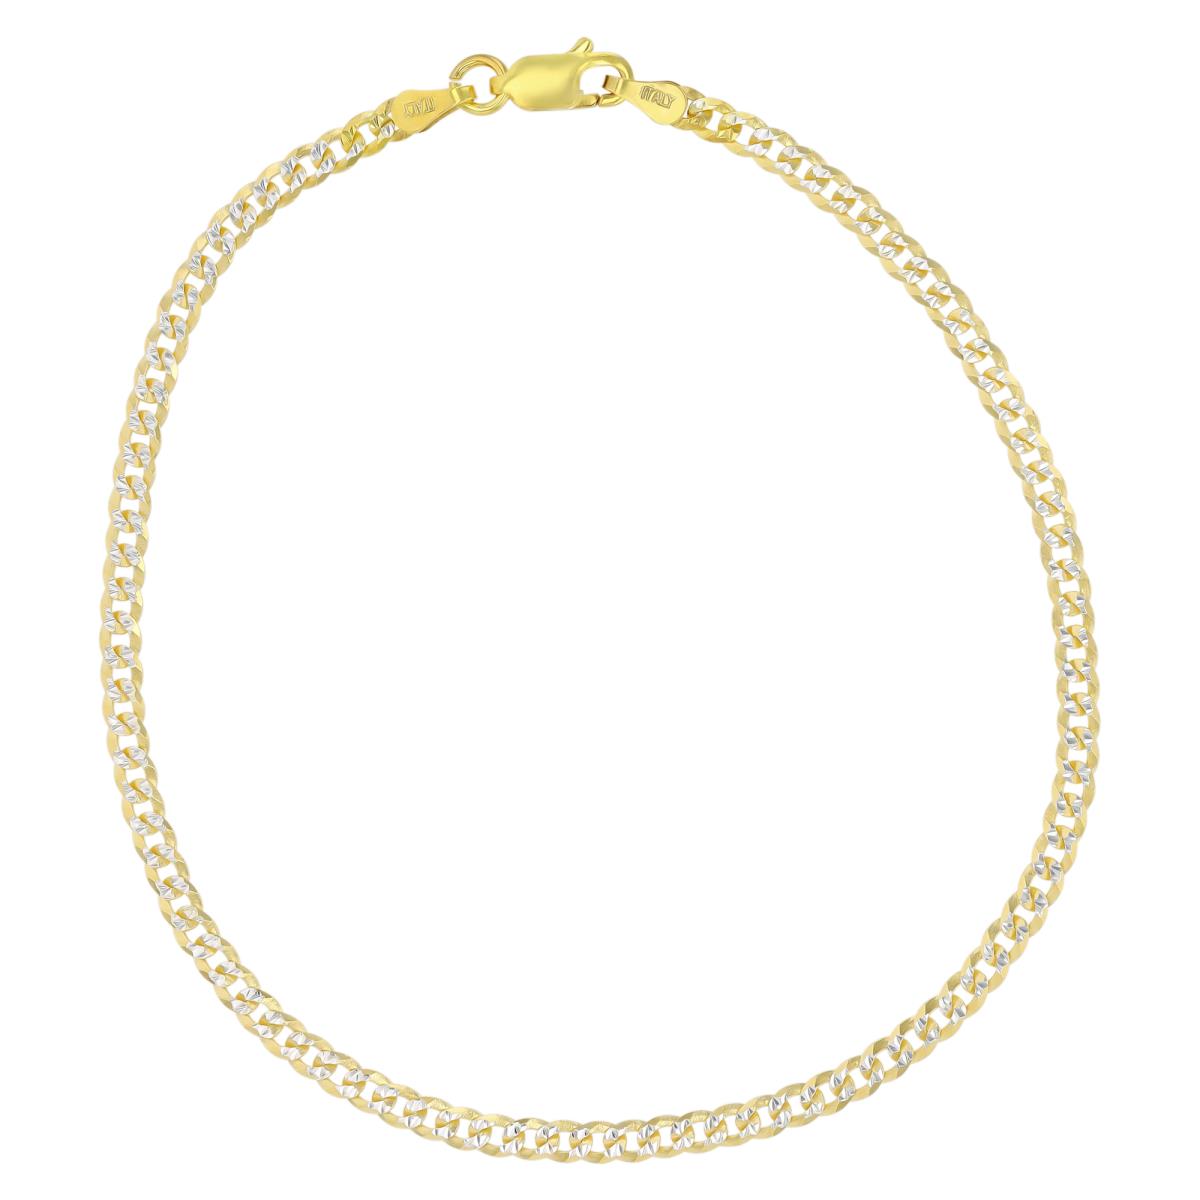 Sterling Silver Two-Tone DC 2.9mm 080 Curb Pave 7"Chain Bracelet